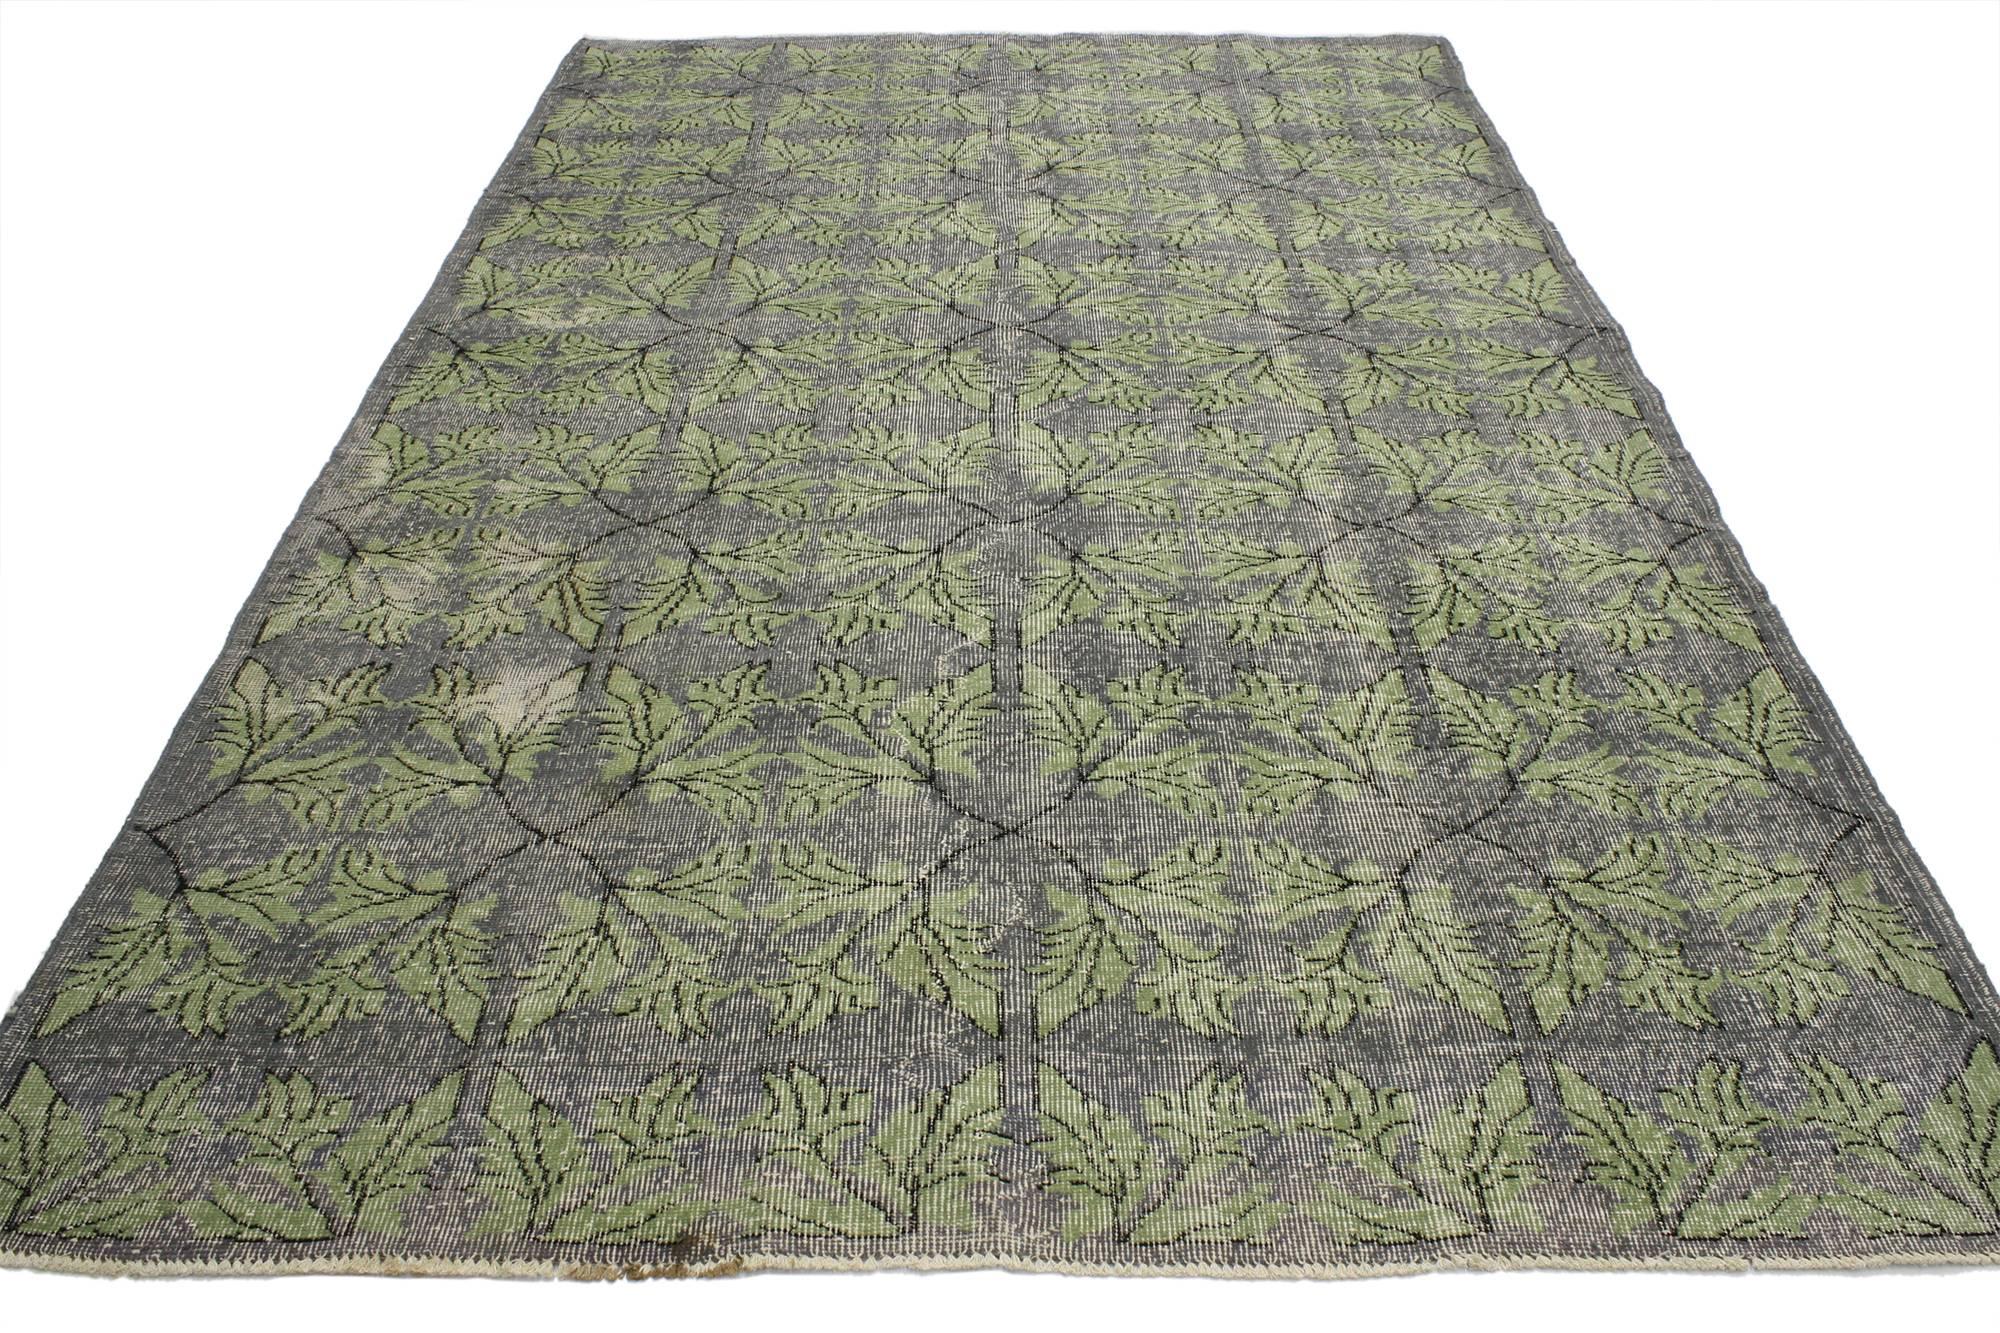 52026 Zeki Muren Distressed Turkish Sivas Rug With Industrial Art Deco Style, 06'00 x 09'07. This distressed vintage Turkish Sivas rug with modern Industrial Art Deco style can make an interior space feel both comfortable and modern yet, full of